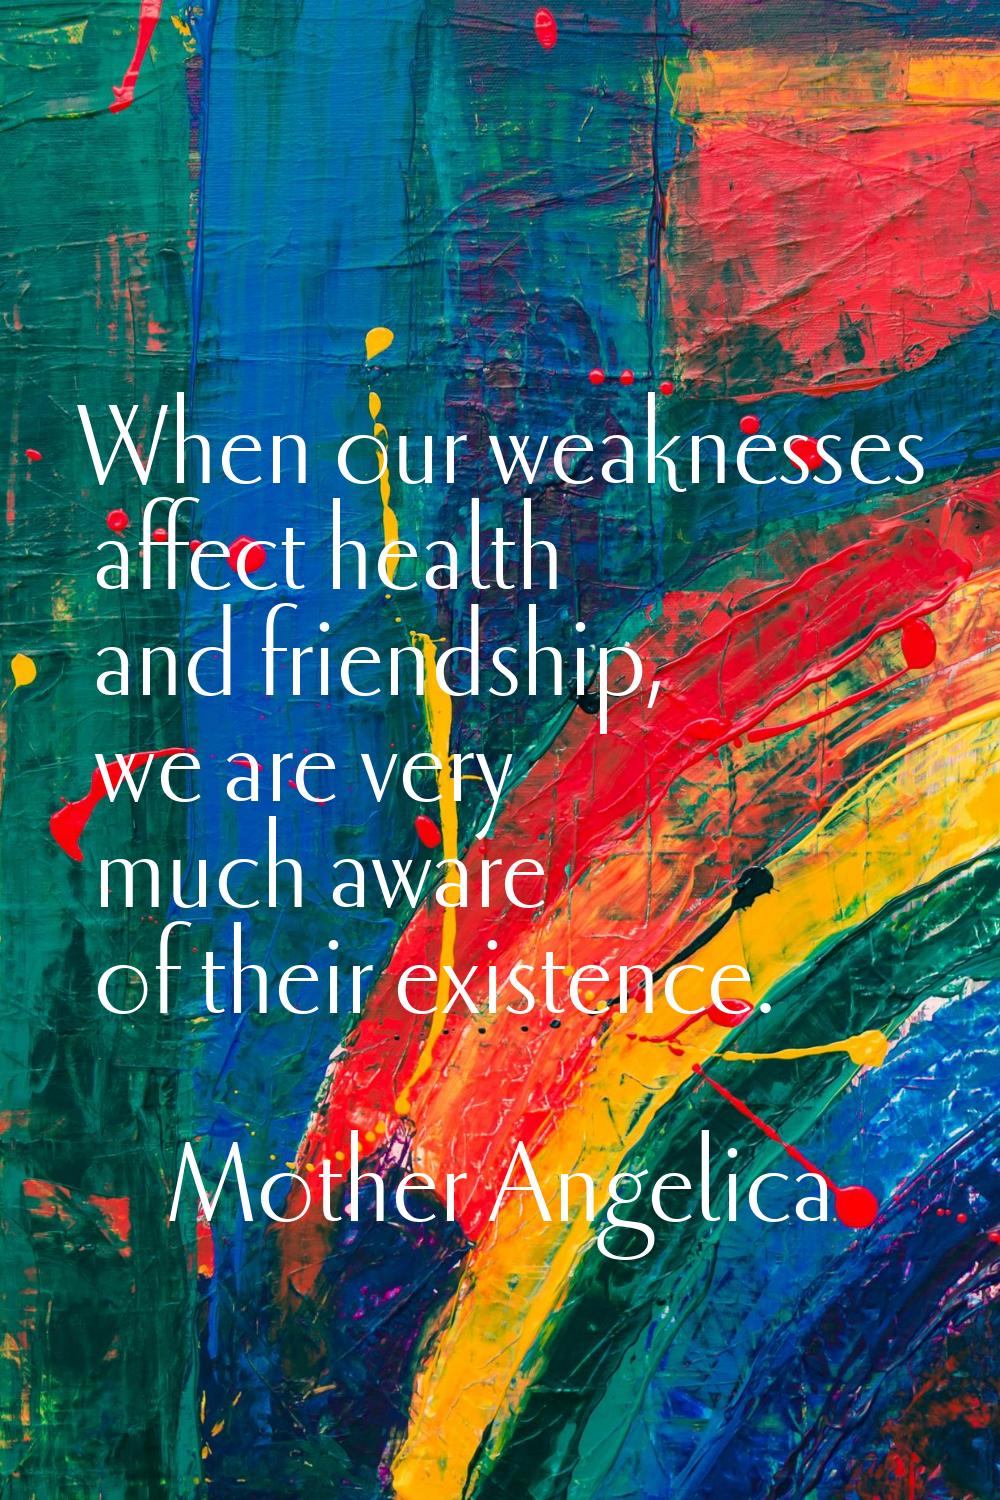 When our weaknesses affect health and friendship, we are very much aware of their existence.